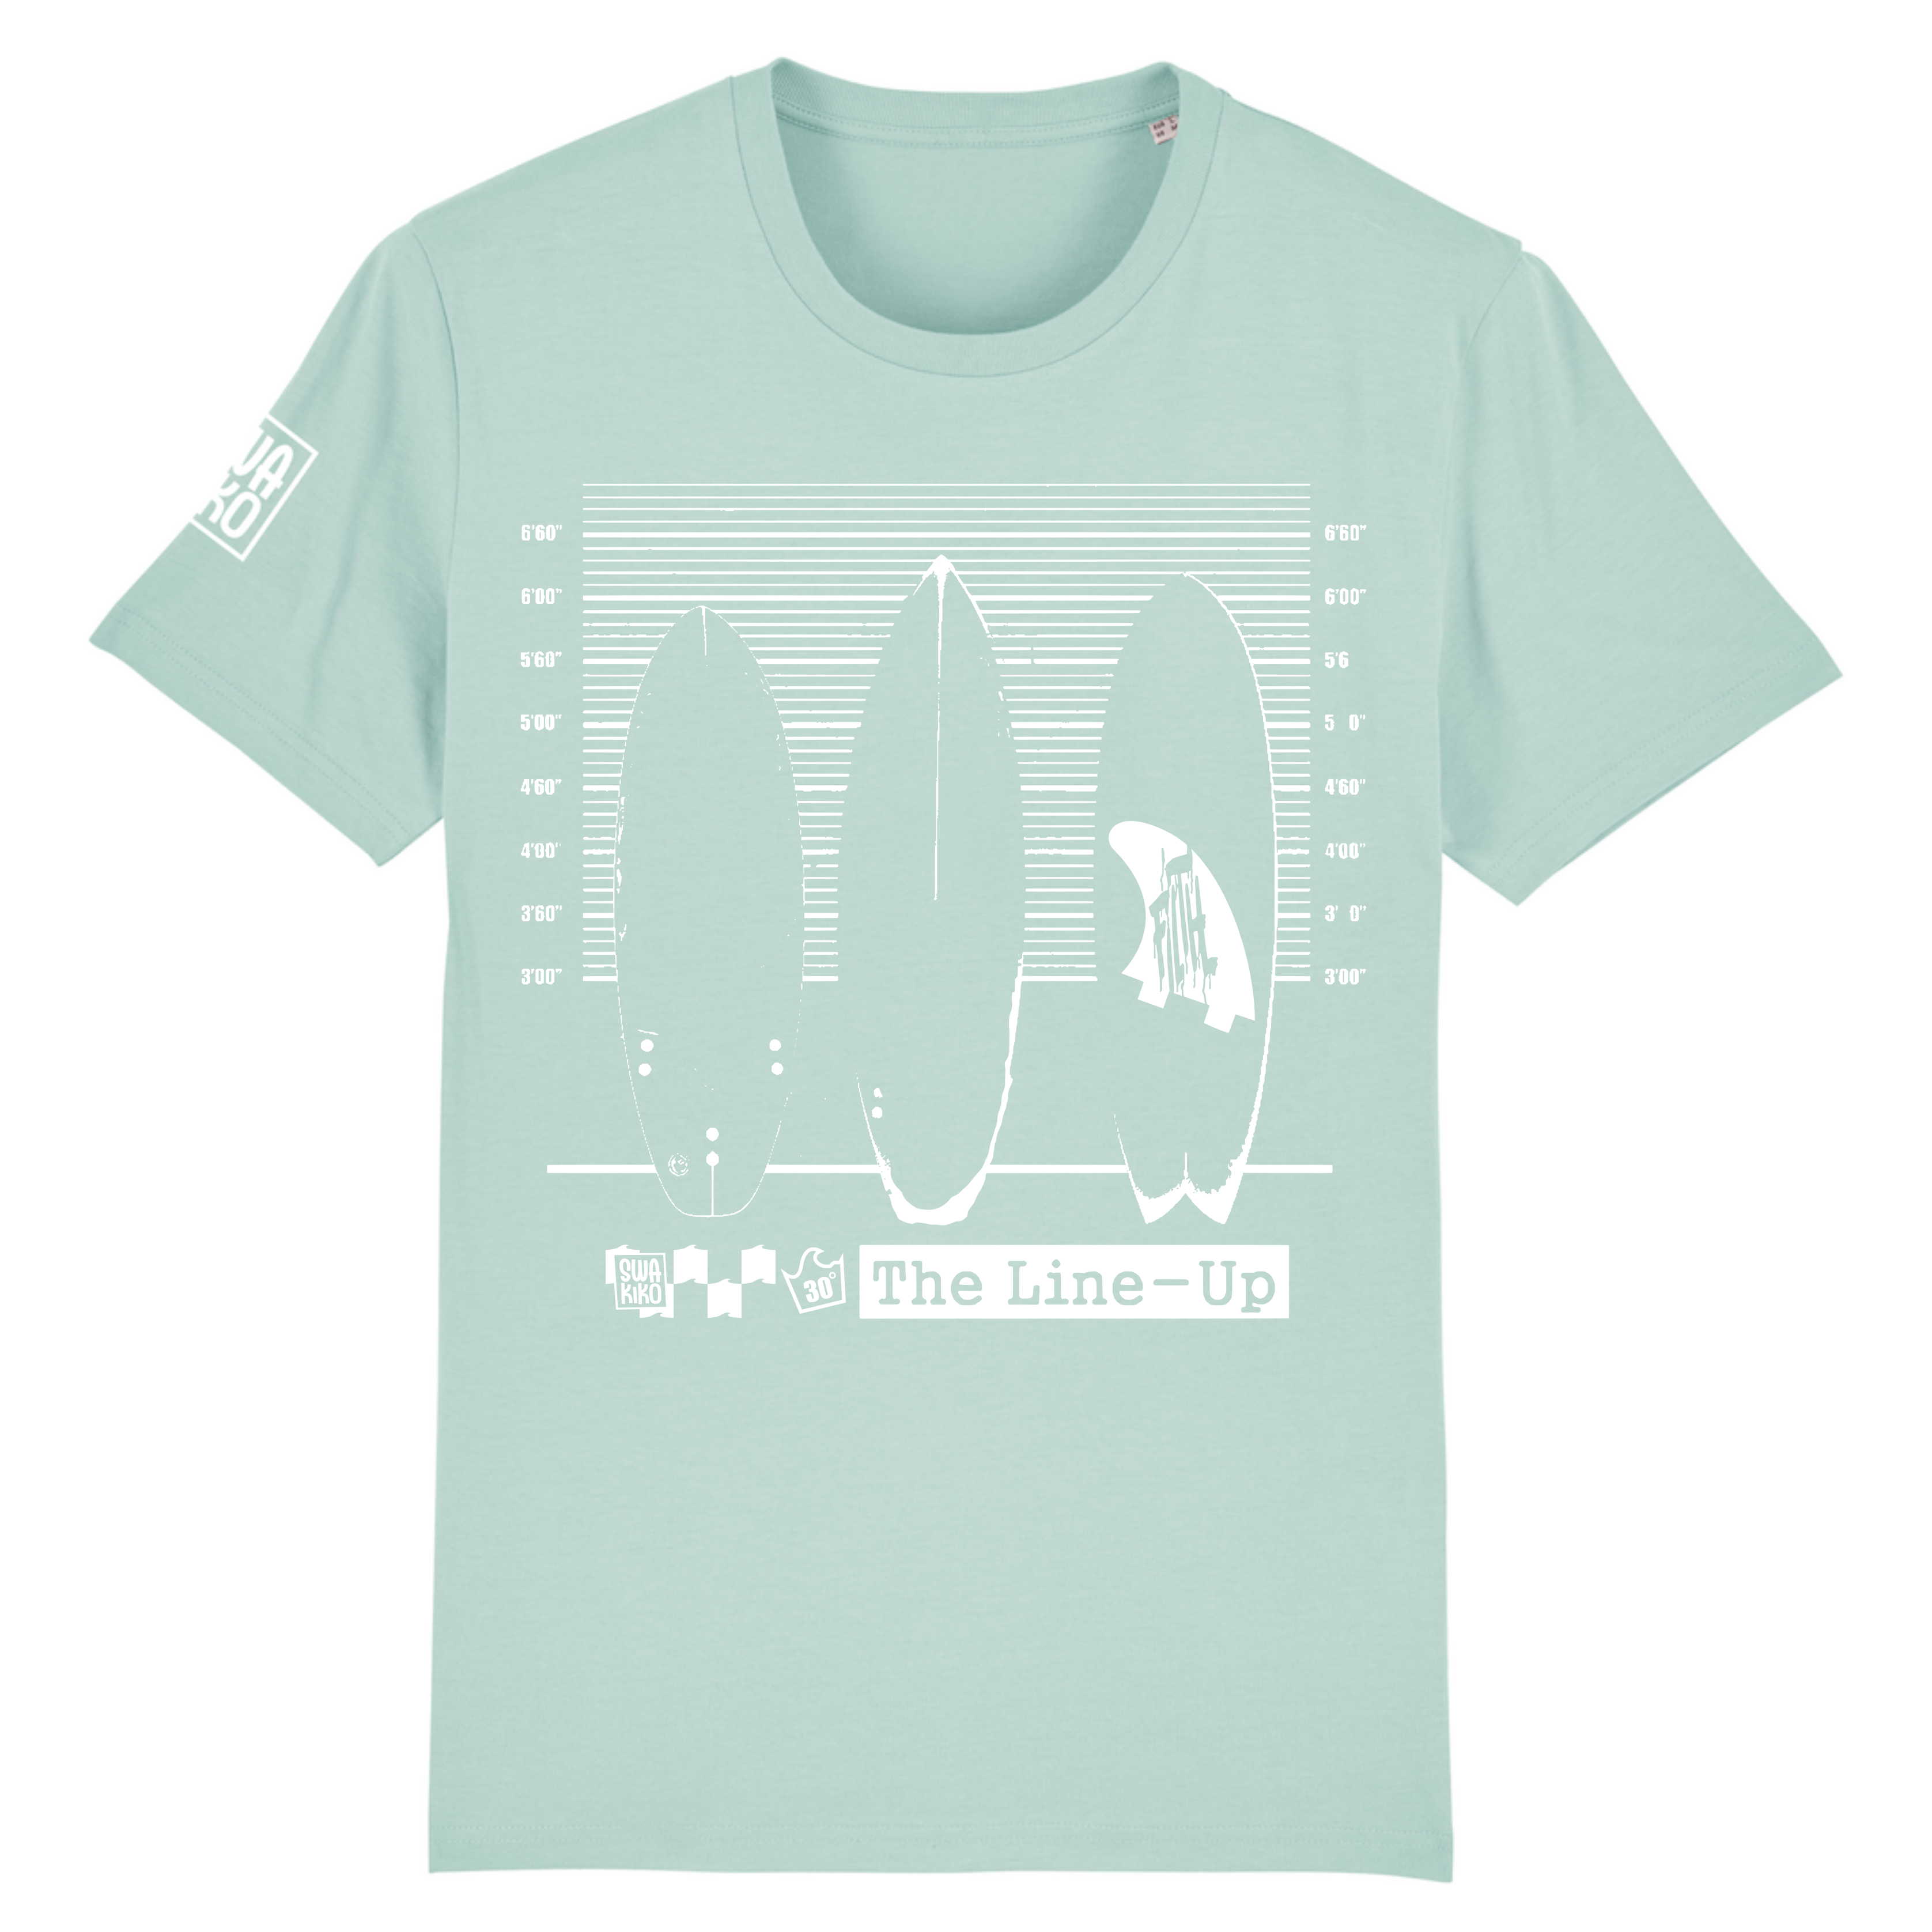 Surf t-shirt mannen turquoise, The line-up